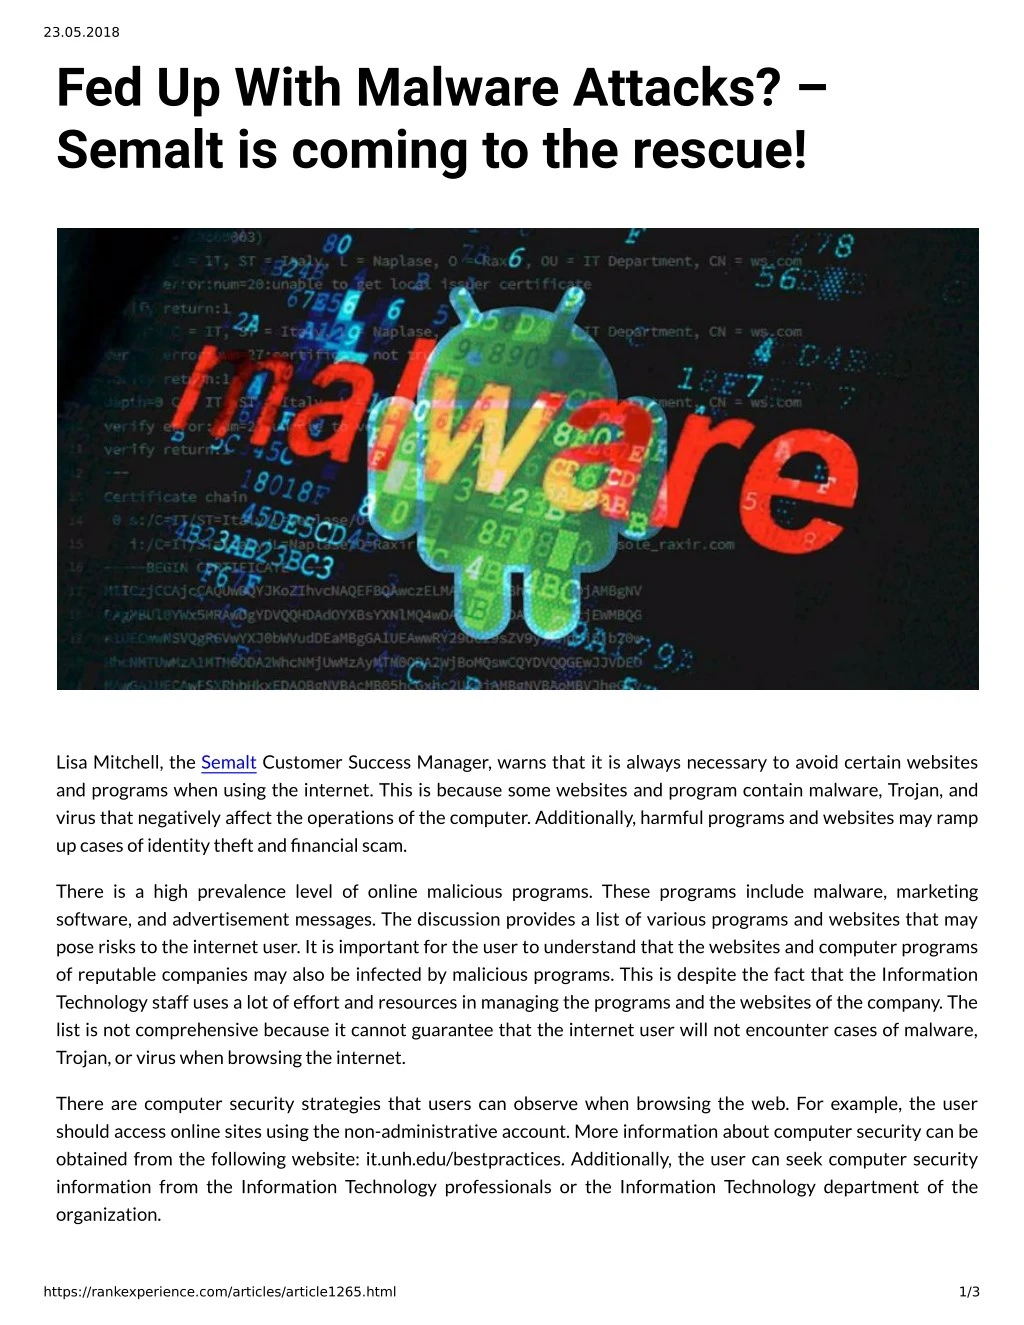 Ppt Fed Up With Malware Attacks A Semalt Is Coming To The Rescue Powerpoint Presentation Id